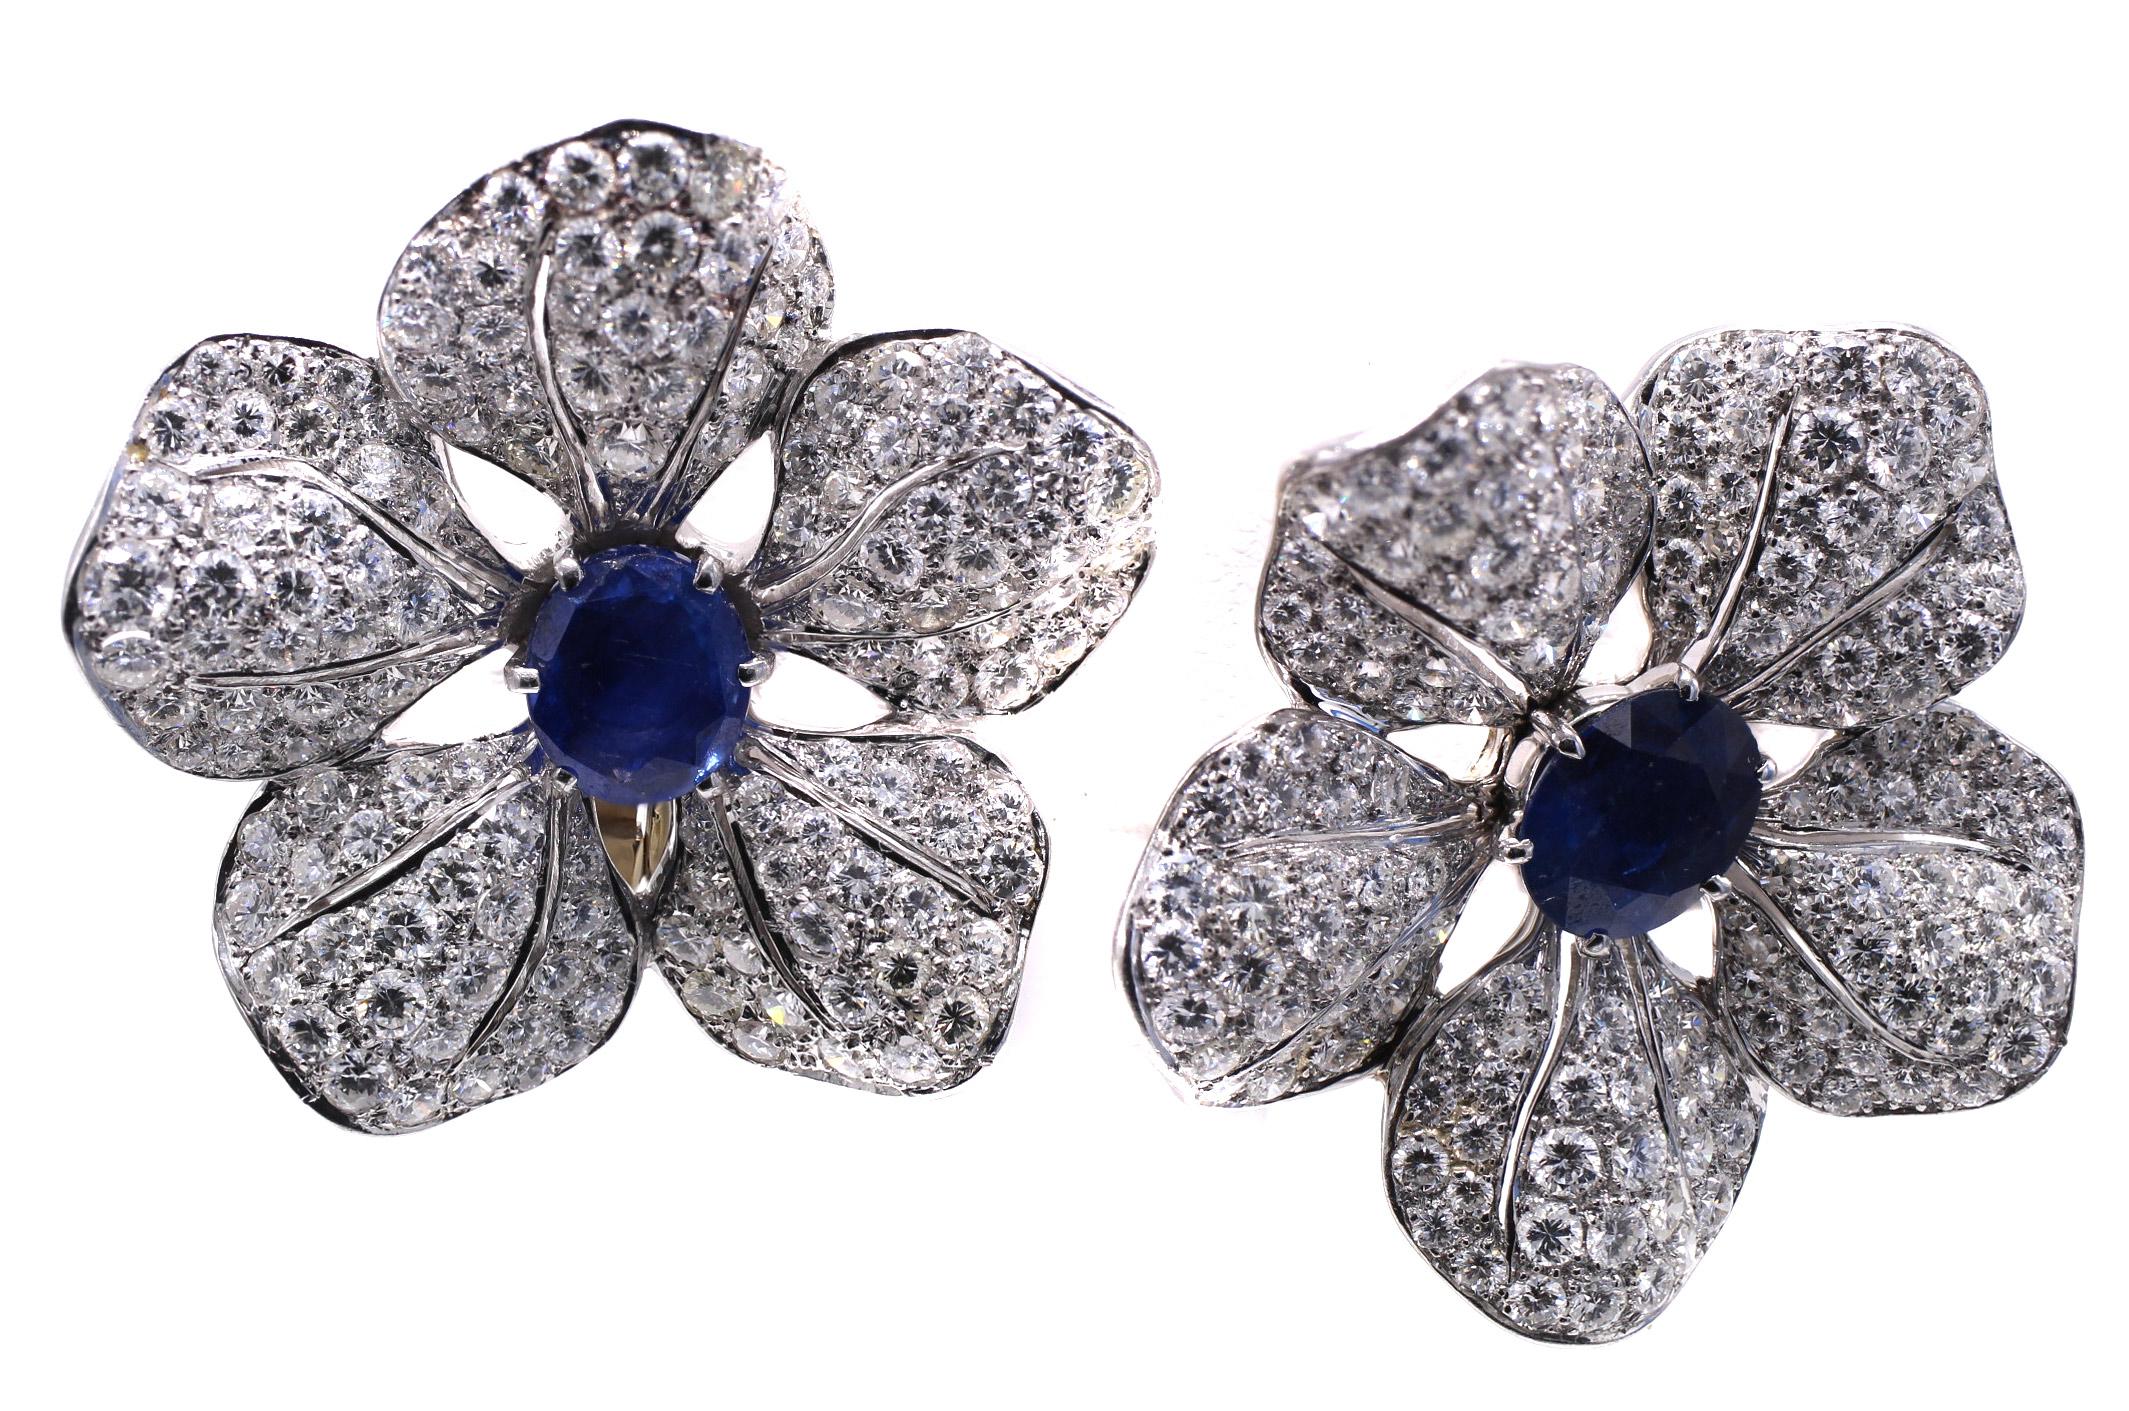 Beautifully designed and masterfully handcrafted in platinum, these 1950s ear clips make a statement on the ear. 5 realistically fashioned flower petals are set with 125 bright white and sparkly round brilliant cut diamonds on each earring, with an